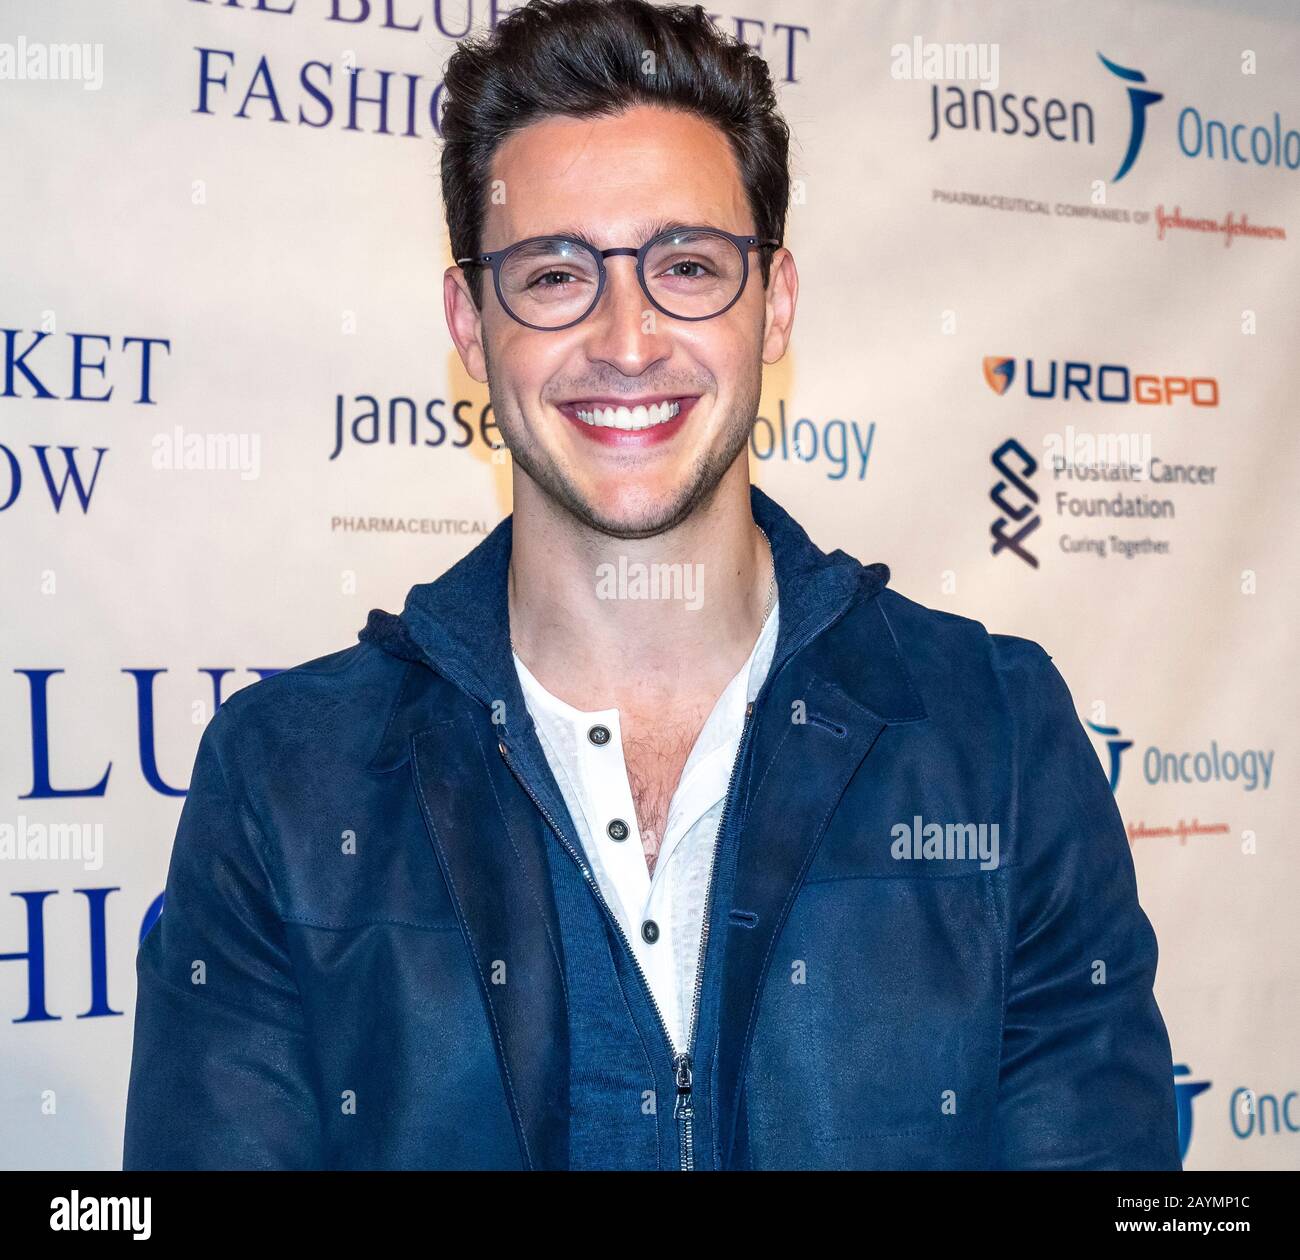 New York, NY, USA - February 5, 2020: Dr. Mike attends The Blue Jacket runwayShow in support of mens health and prostate cancer awareness at Pier 59 S Stock Photo